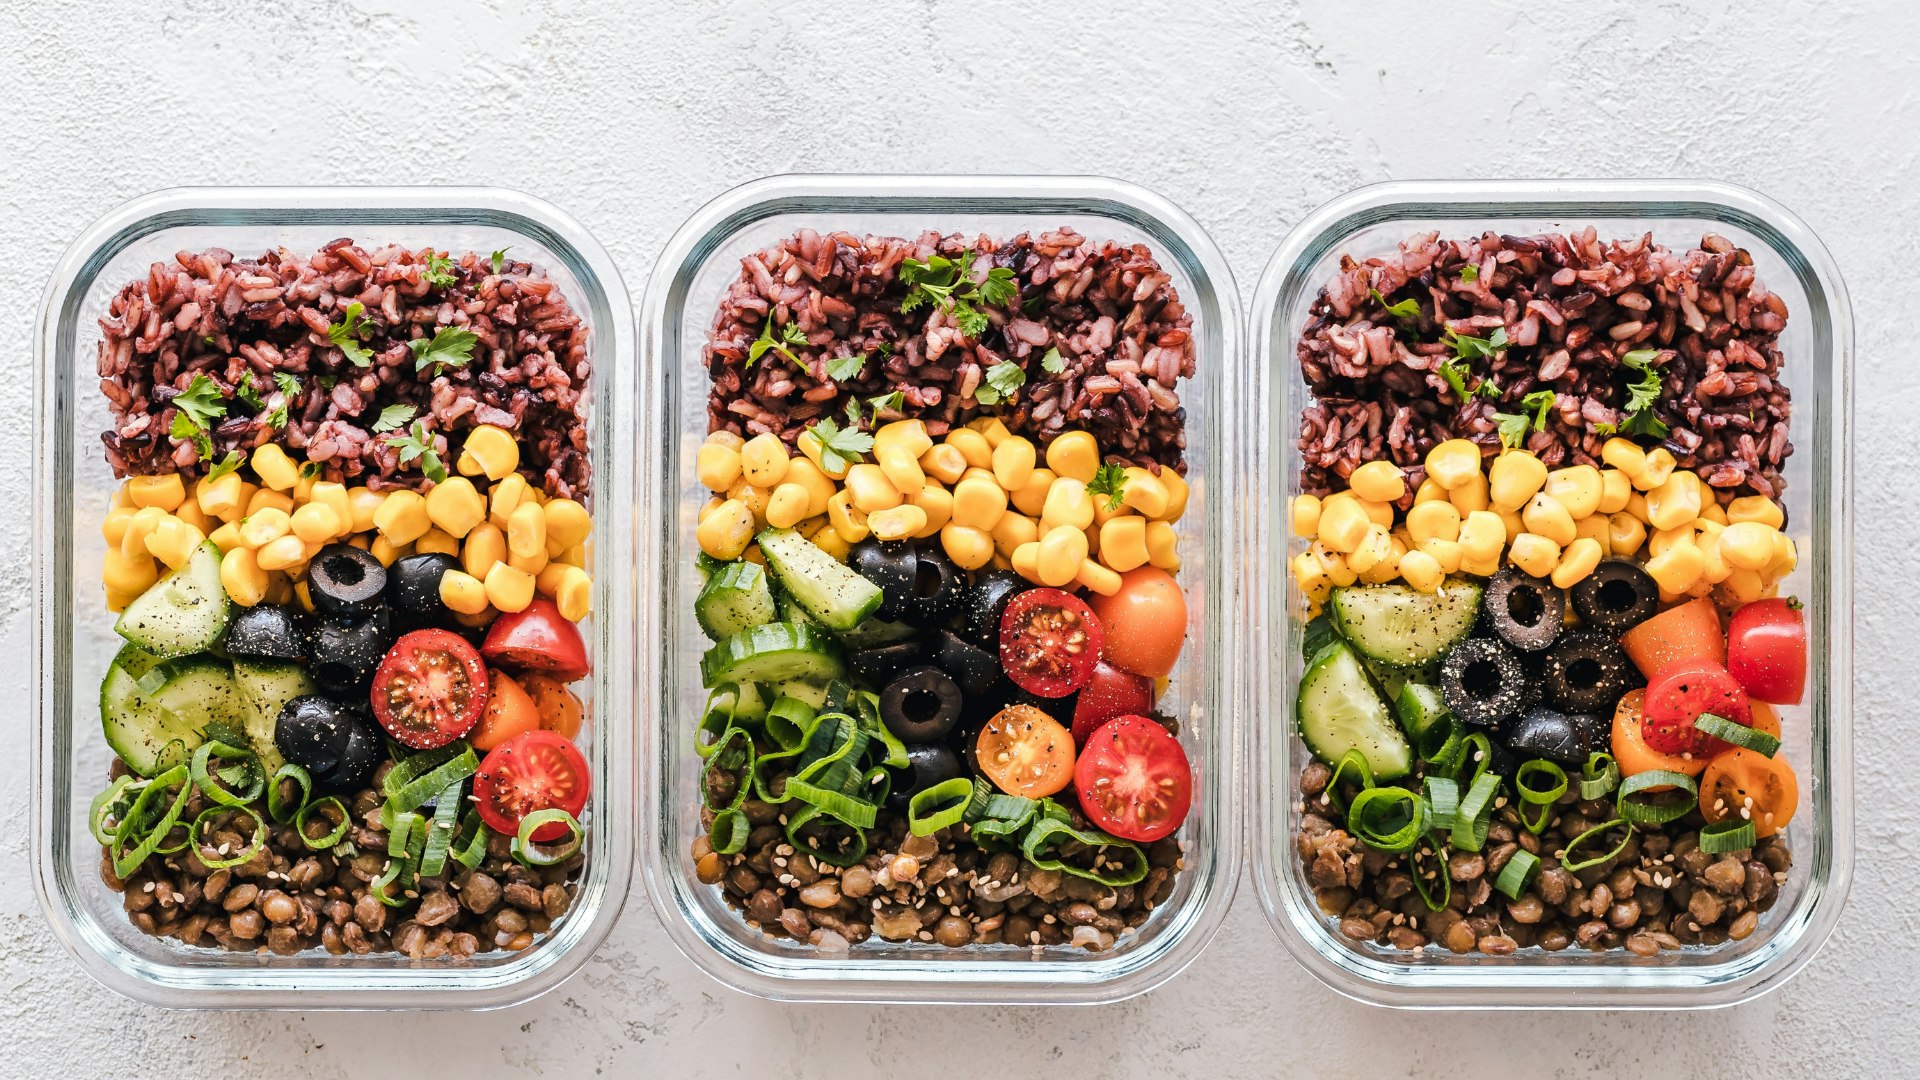 Best Meal Prep Containers - The best containers for meal prep!